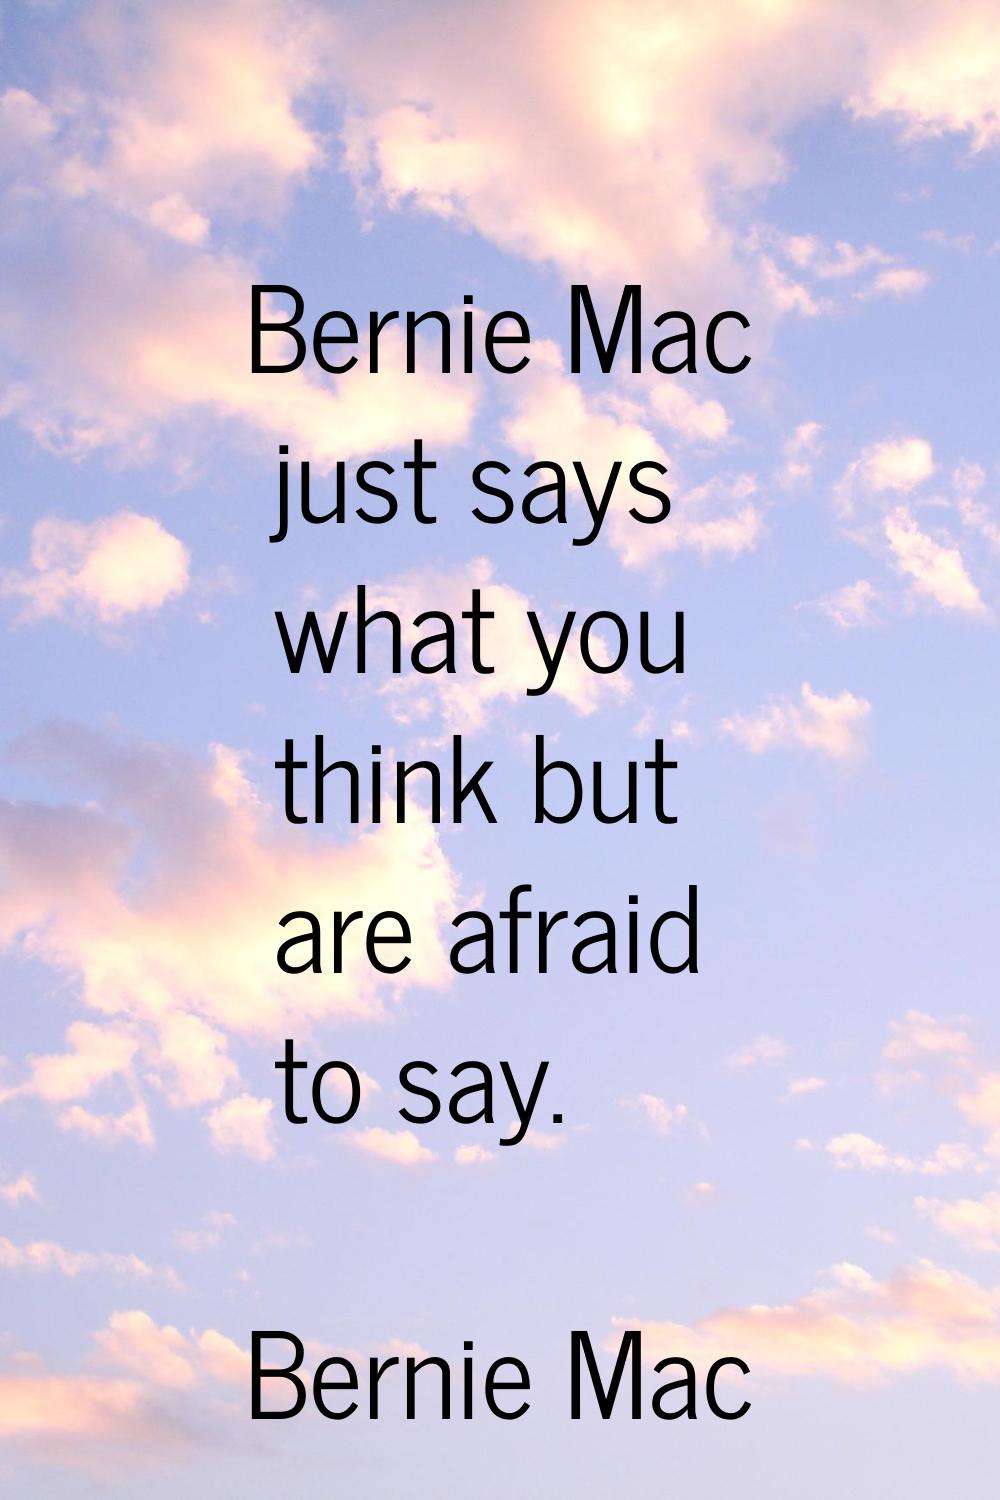 Bernie Mac just says what you think but are afraid to say.